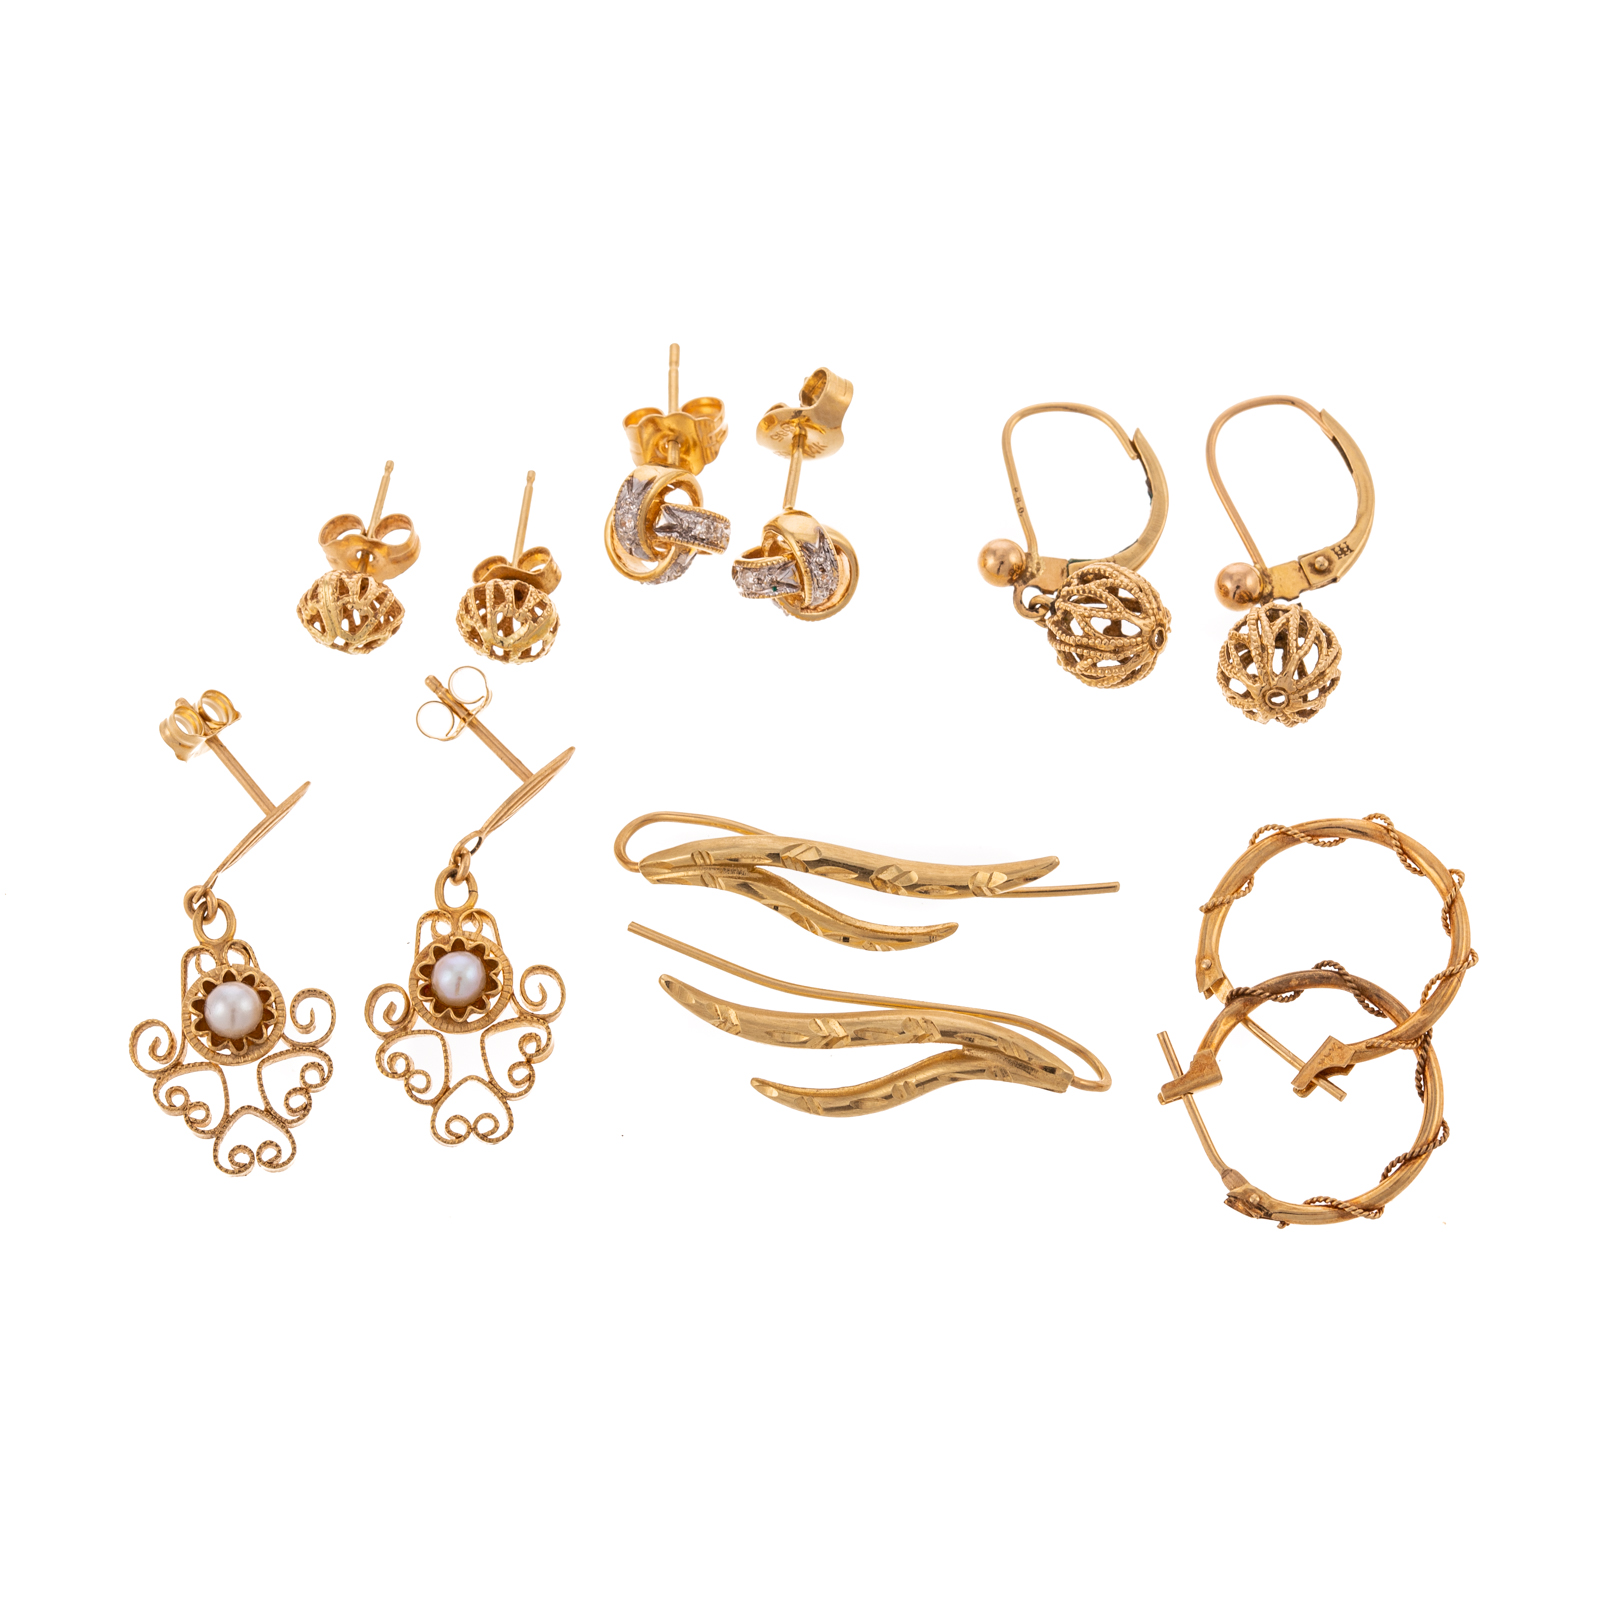 A COLLECTION OF SIX EARRINGS IN